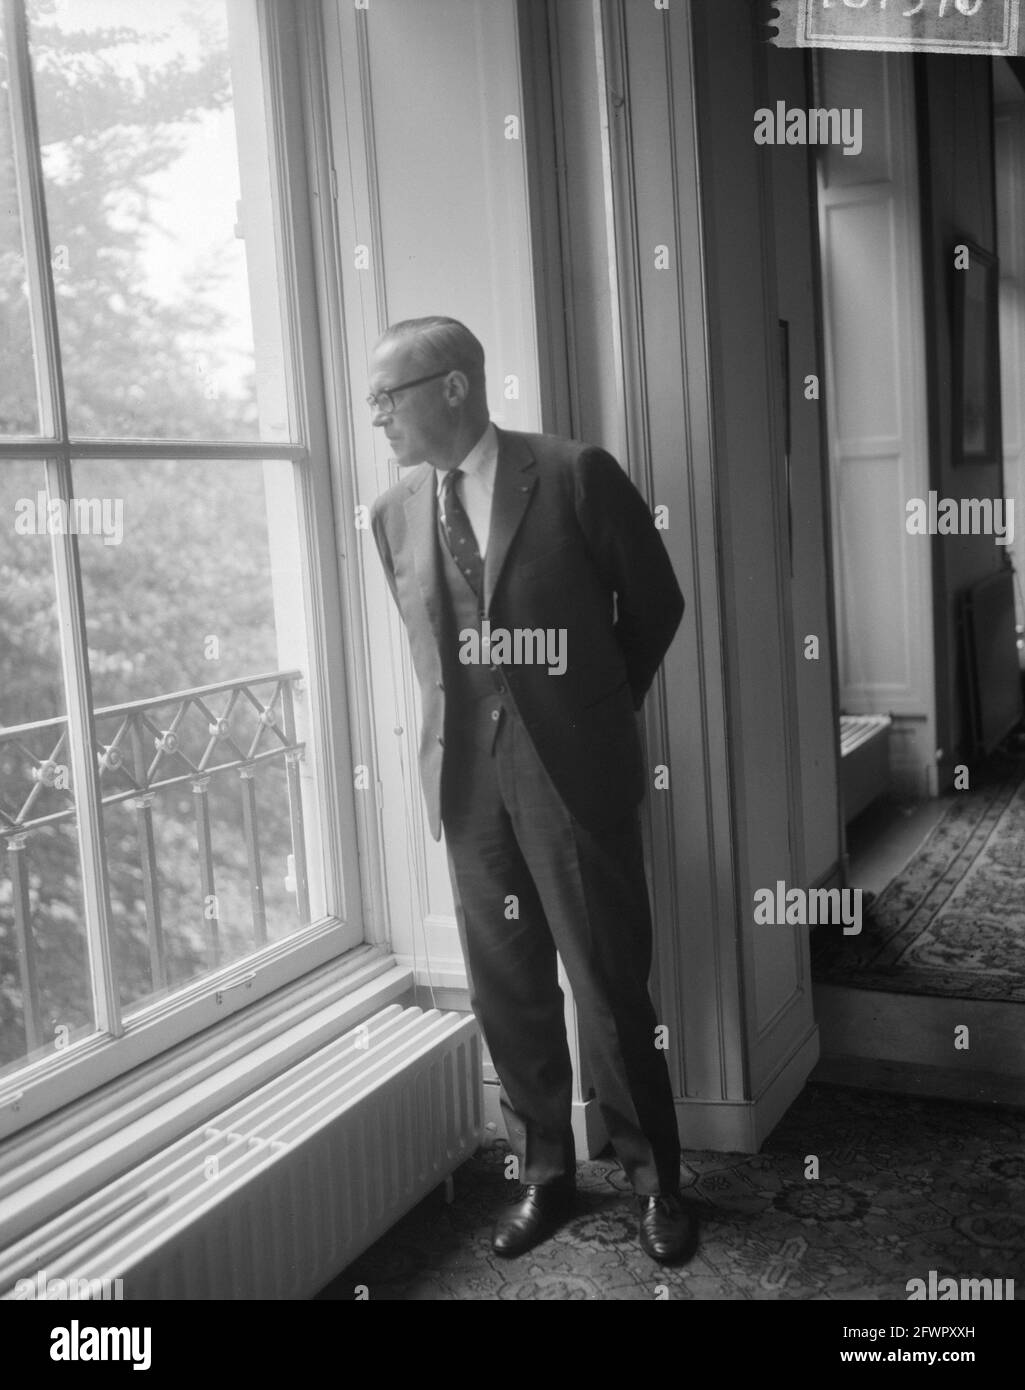 Mr. J.G. van Schelle secretary to Mr. Claus von Amsberg, here in his room, 3 September 1965, chambers, secretaries, The Netherlands, 20th century press agency photo, news to remember, documentary, historic photography 1945-1990, visual stories, human history of the Twentieth Century, capturing moments in time Stock Photo